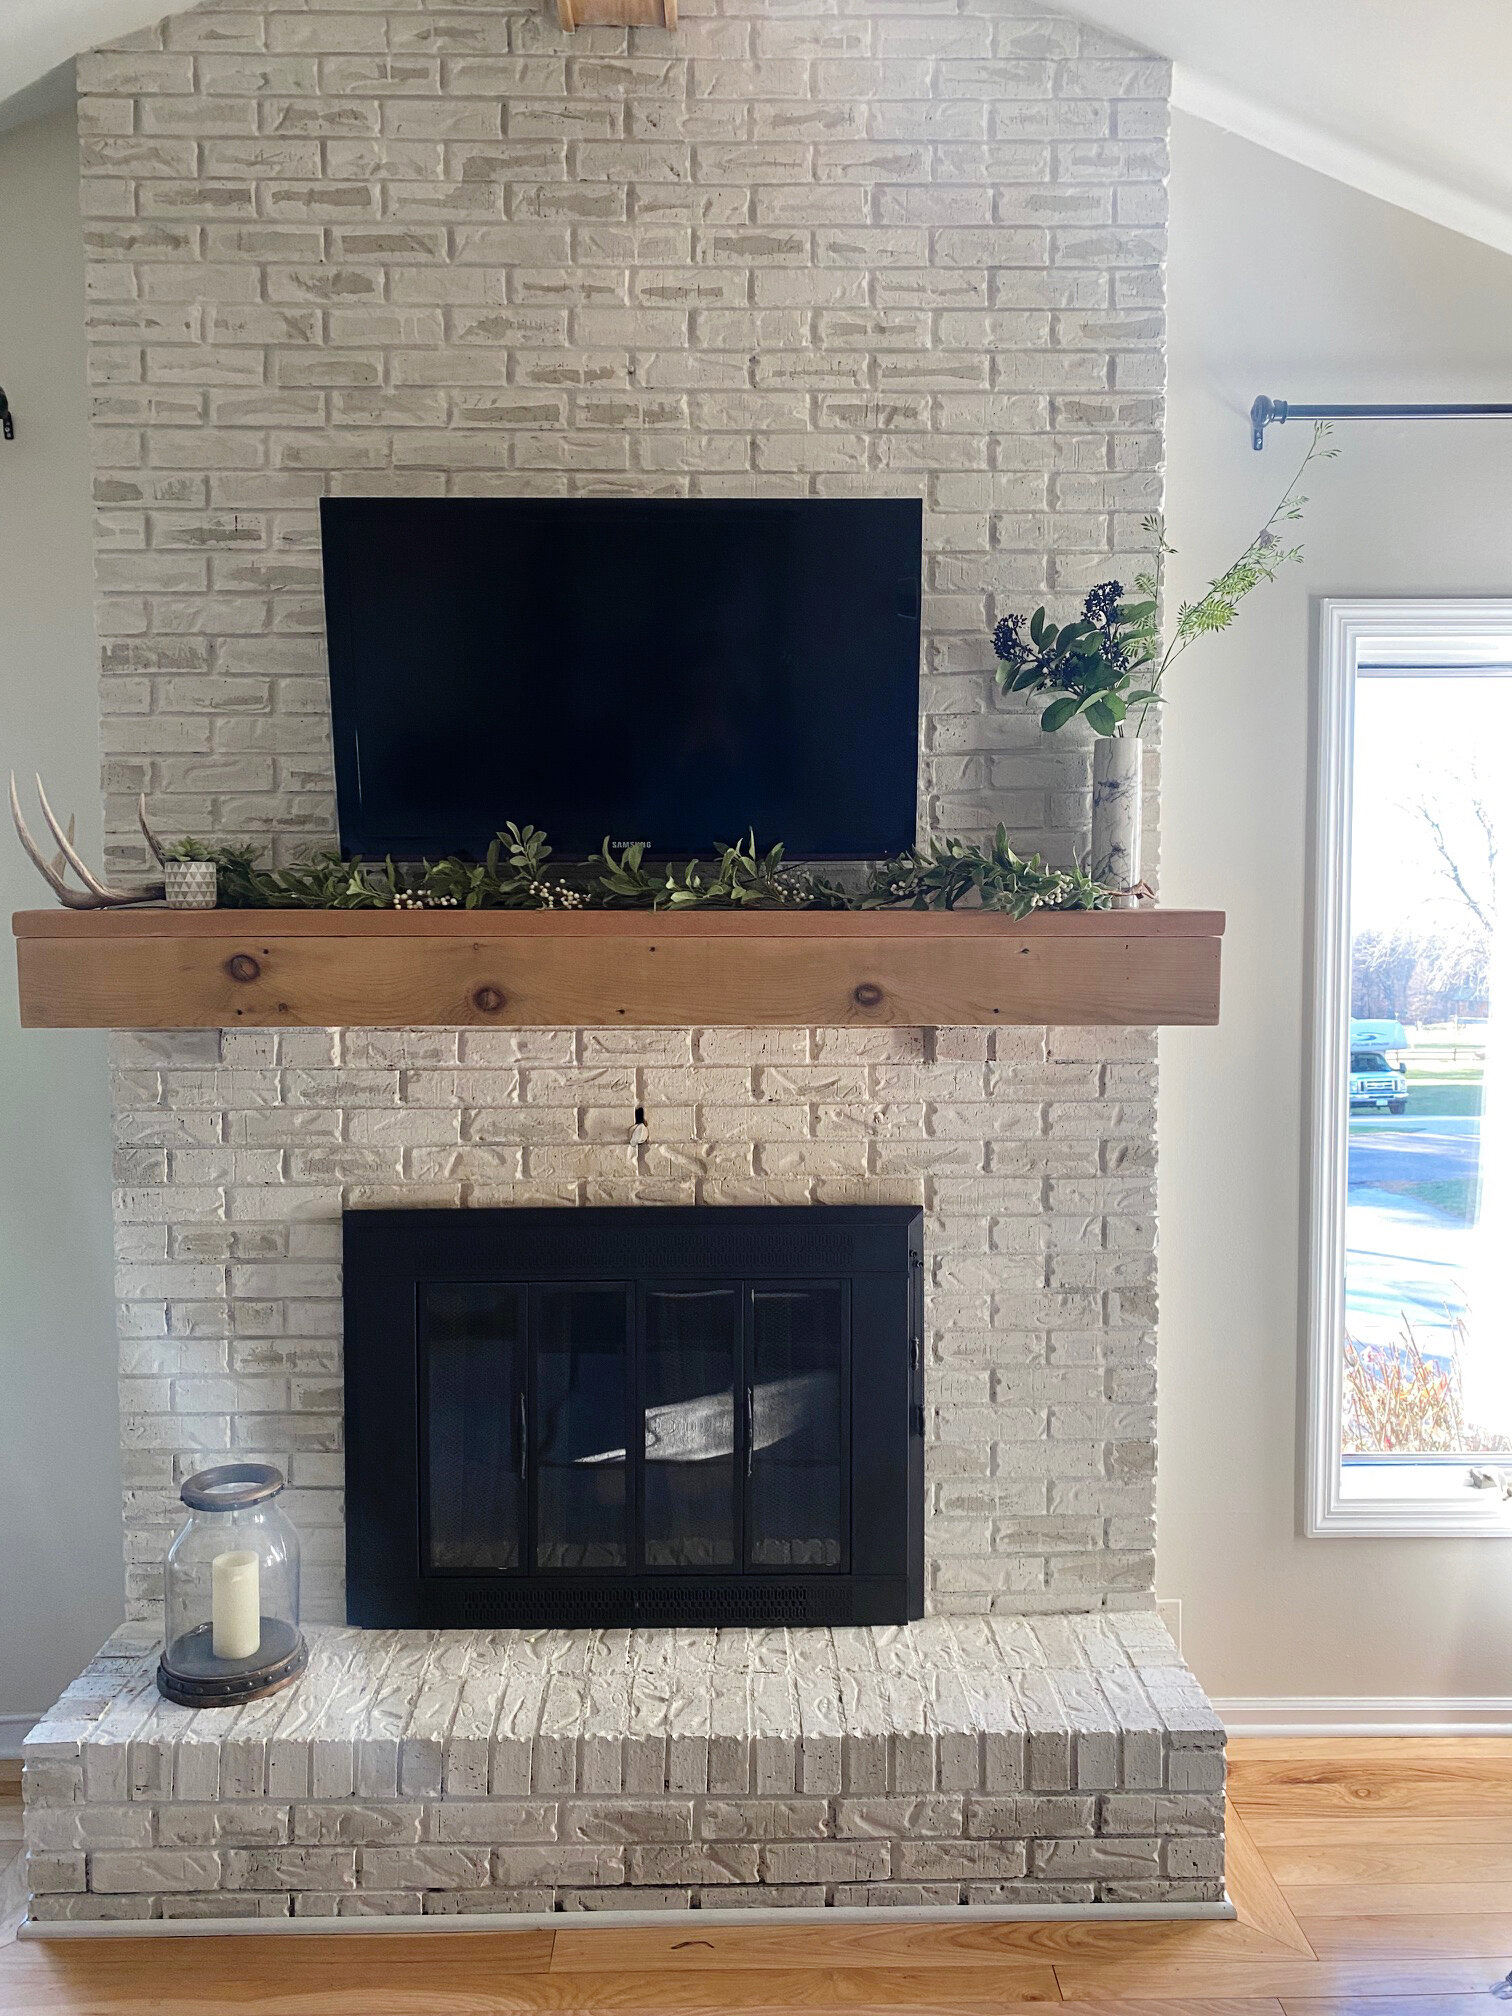 My Painted Brick Fireplace Diy Tutorial, How Can I Make My Red Brick Fireplace Look Better